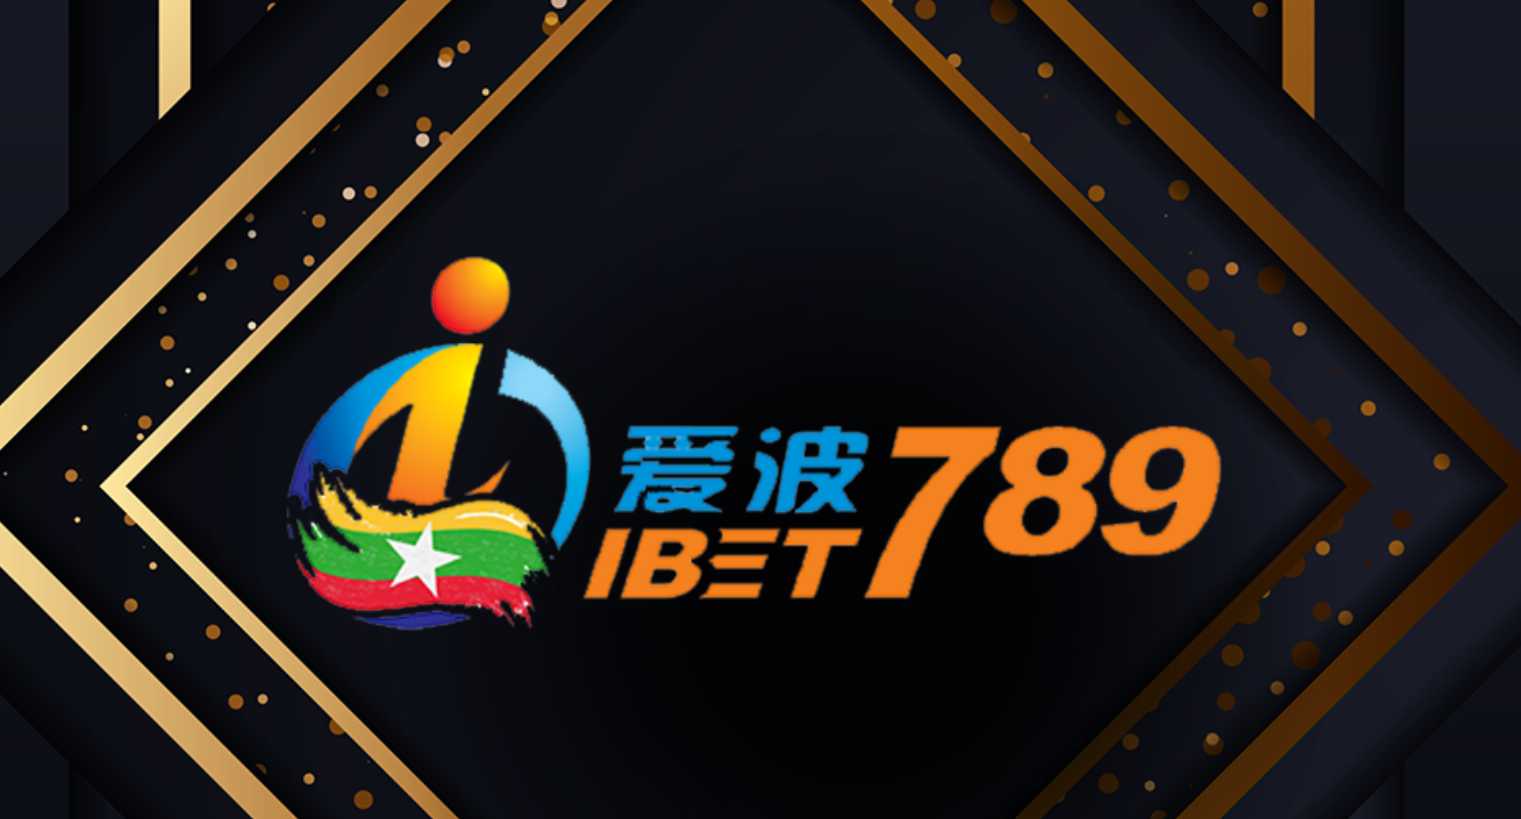 Why should you watch iBet789 live tv matches?